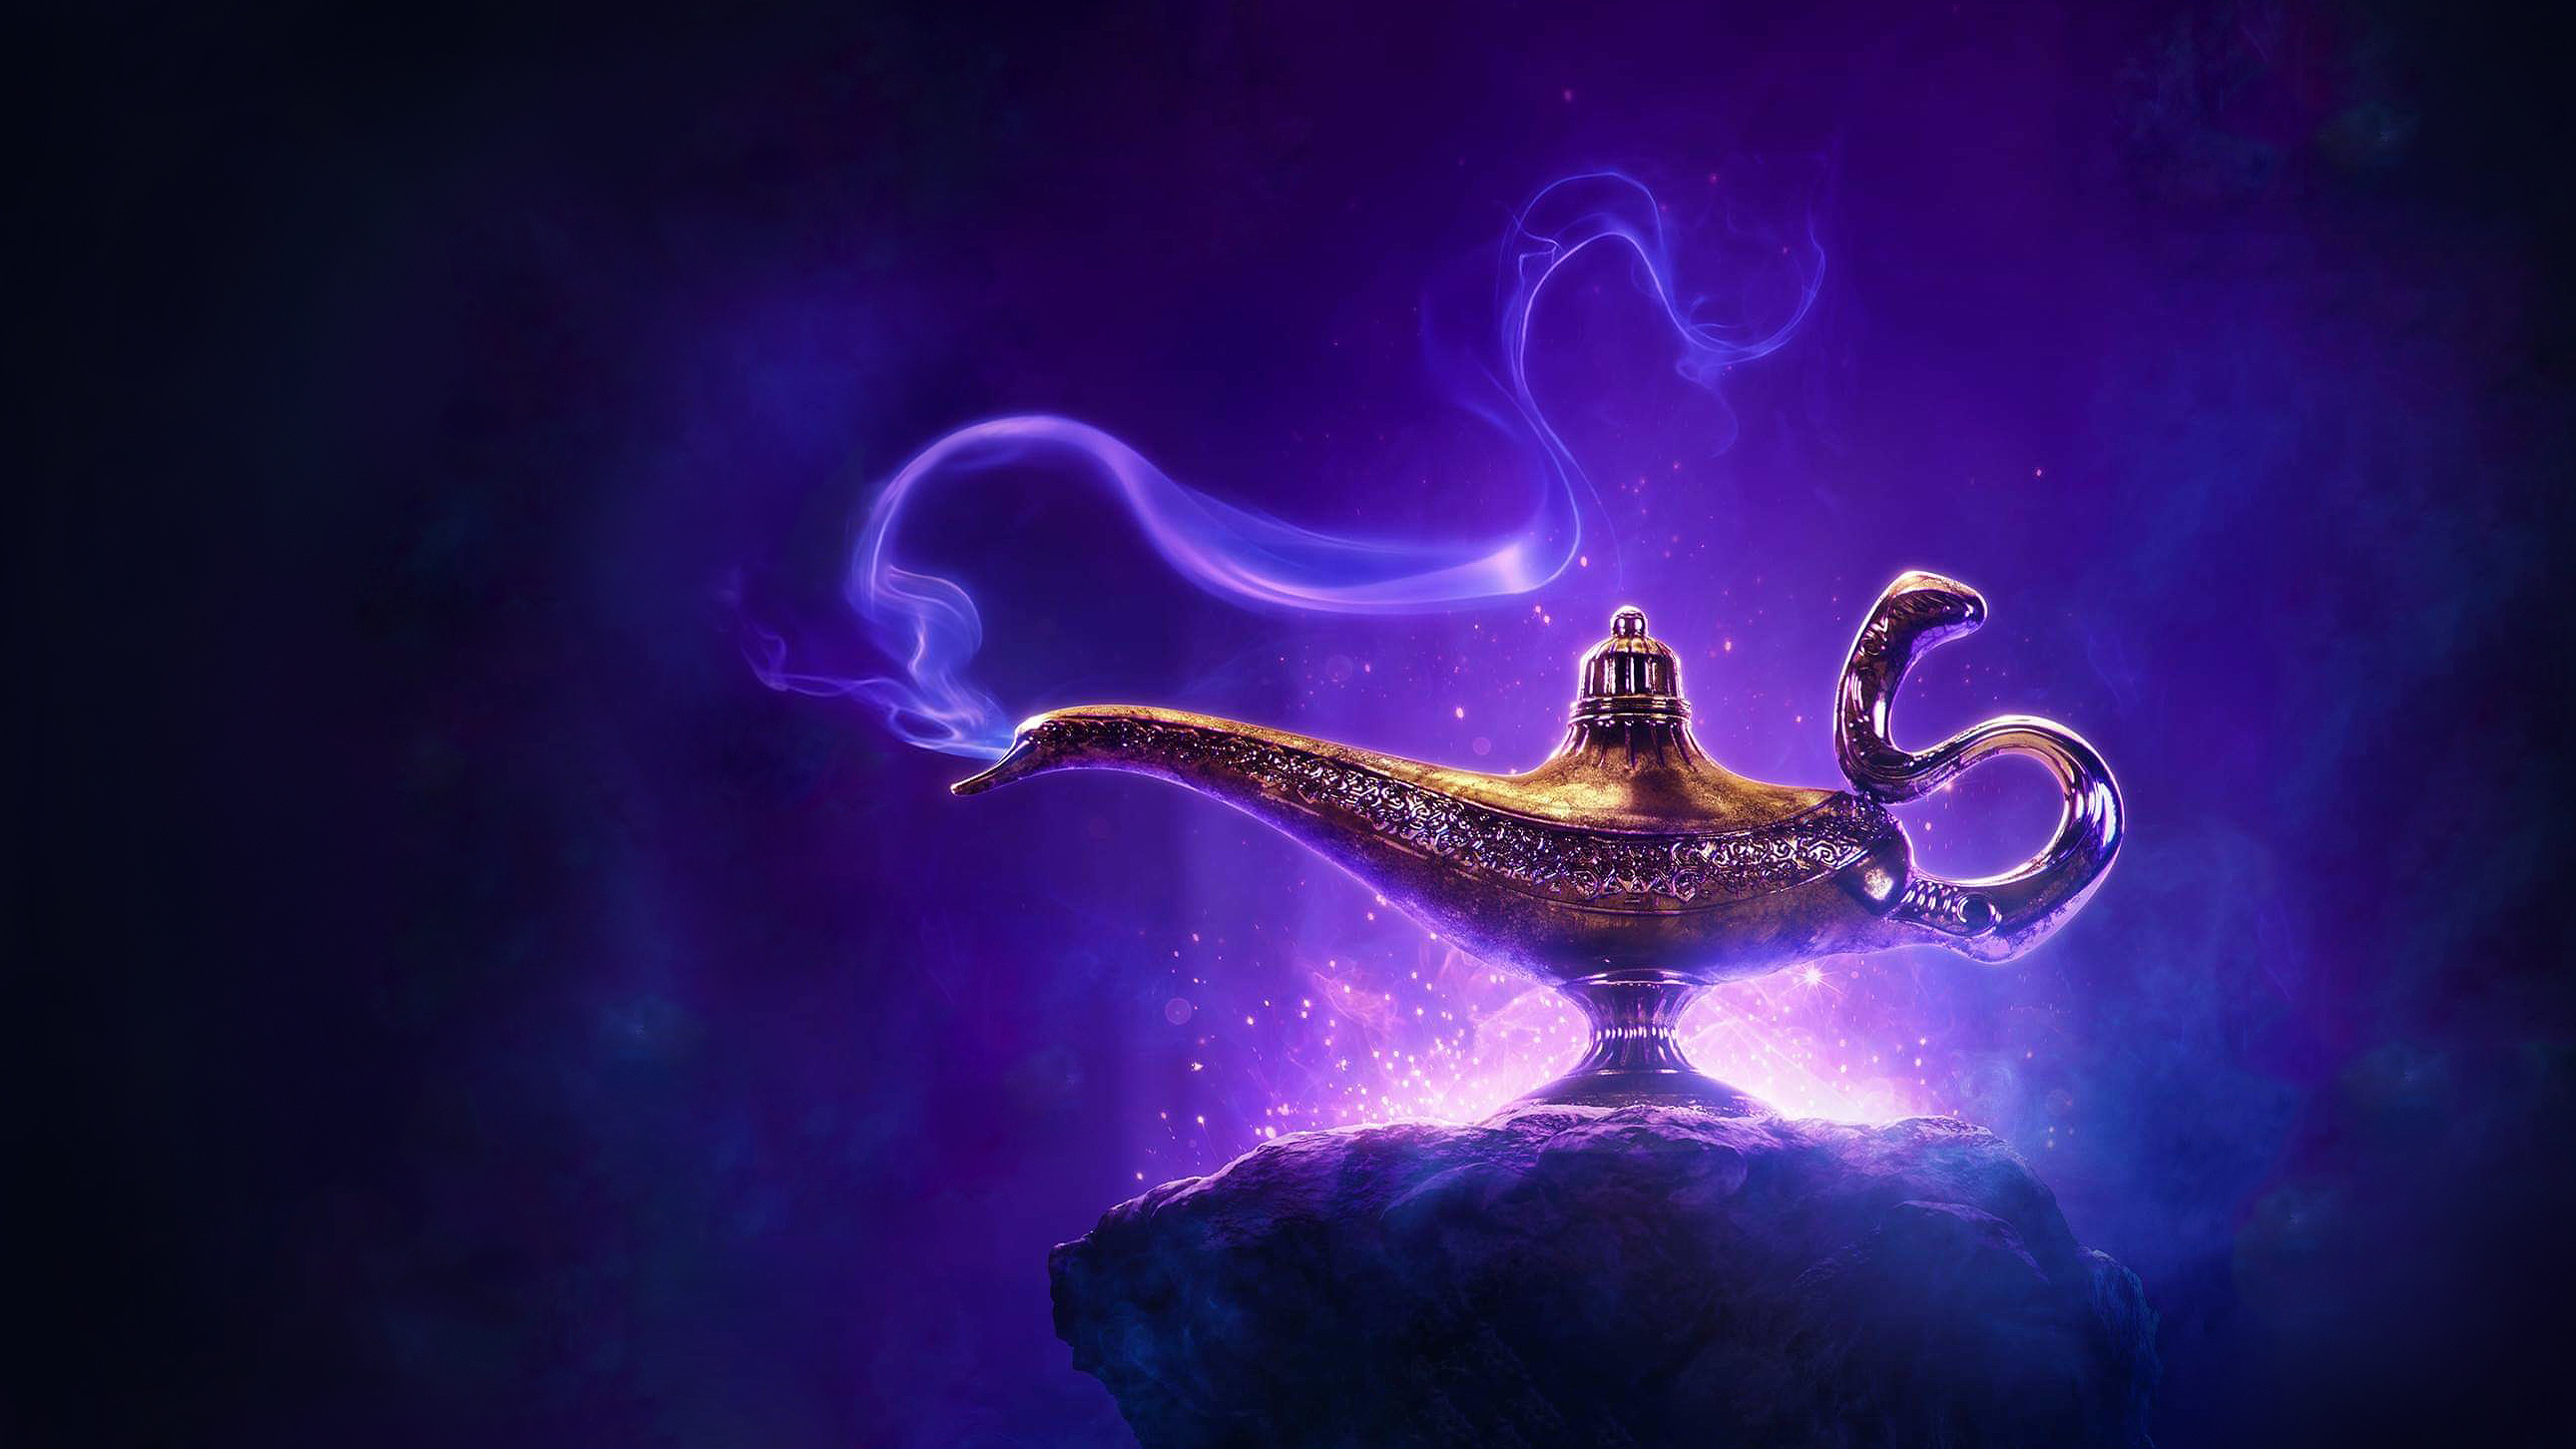 Disney Aladdin 2019 Movie Poster Wallpaper, HD Movies 4K Wallpapers,  Images, Photos and Background - Wallpapers Den